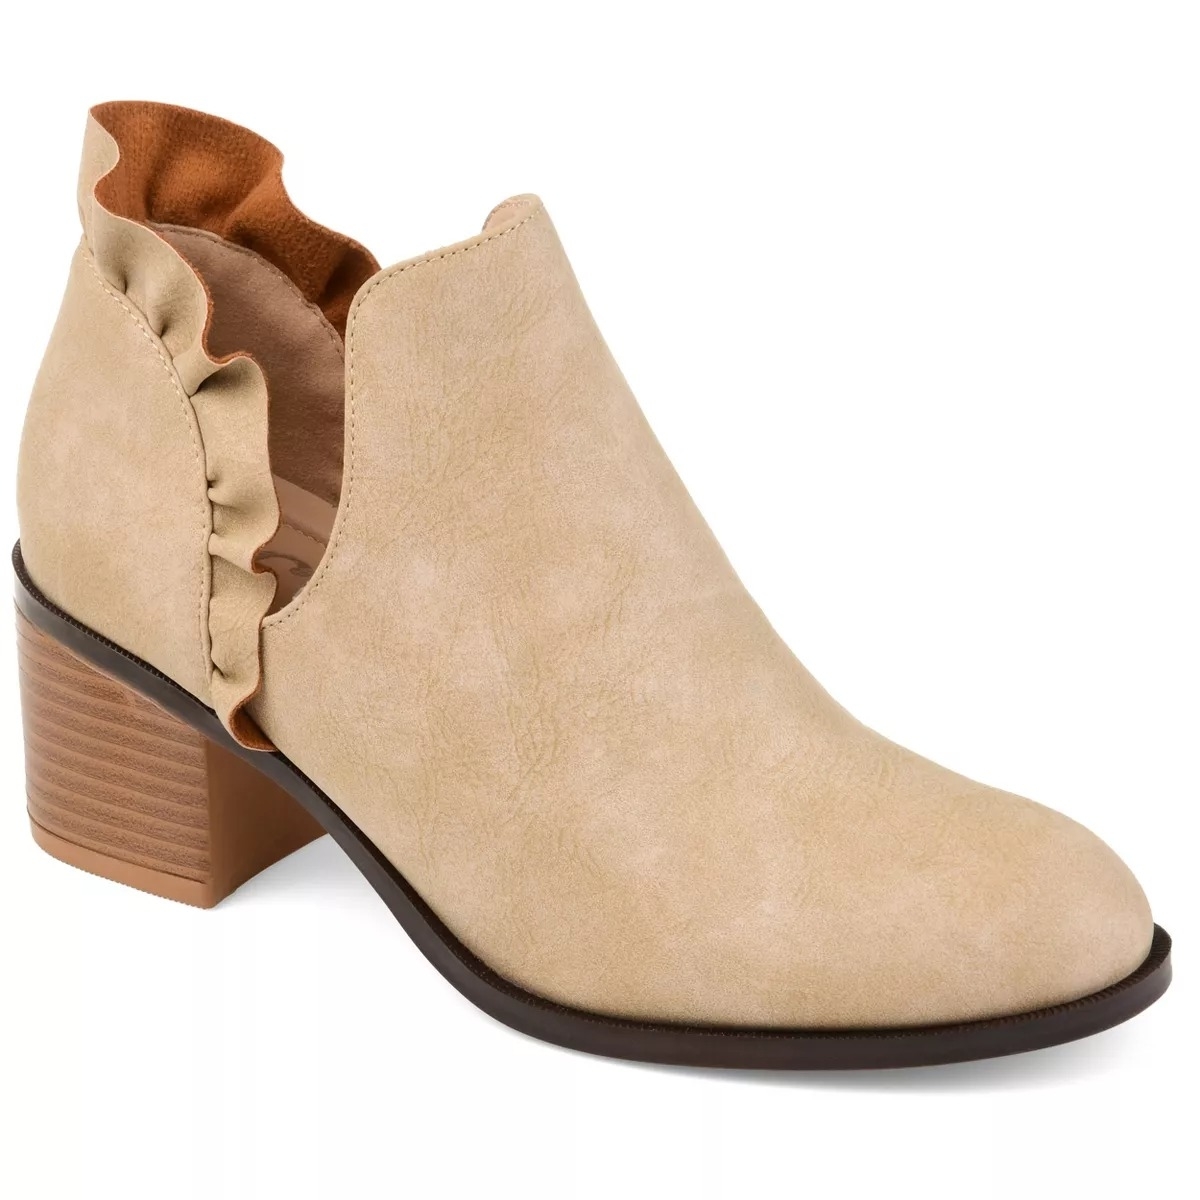 ankle boots with ruffle detailing